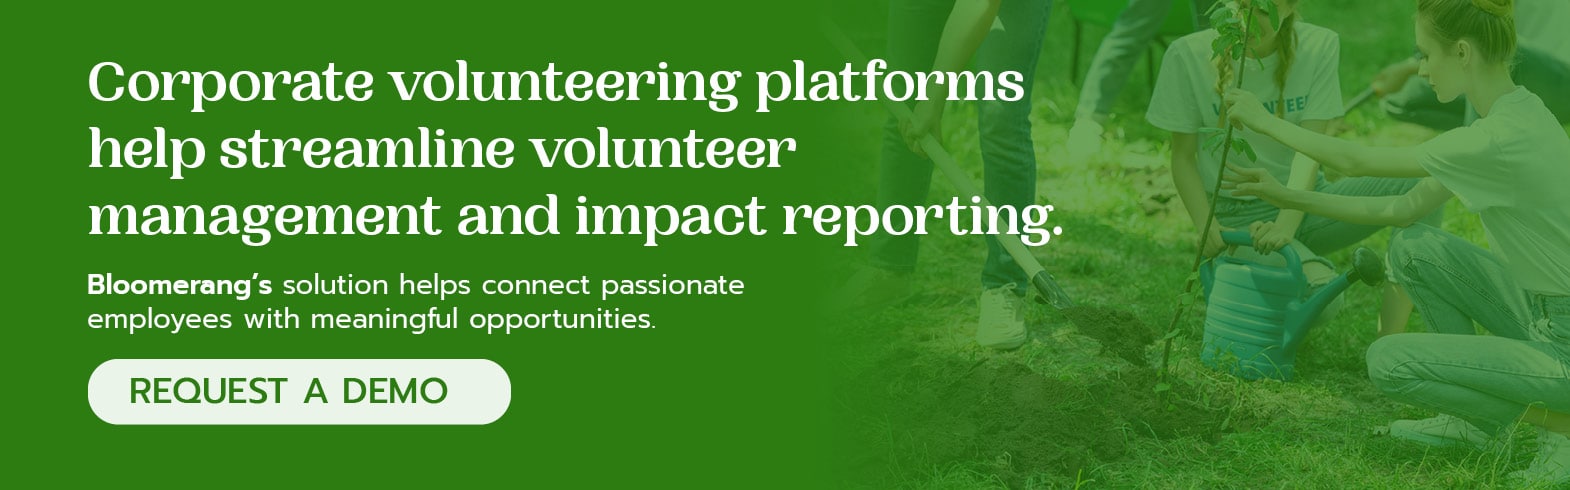 Bloomerang's corporate volunteering platform helps connect passionate volunteers with engaging opportunities. Click here to schedule a demo. 